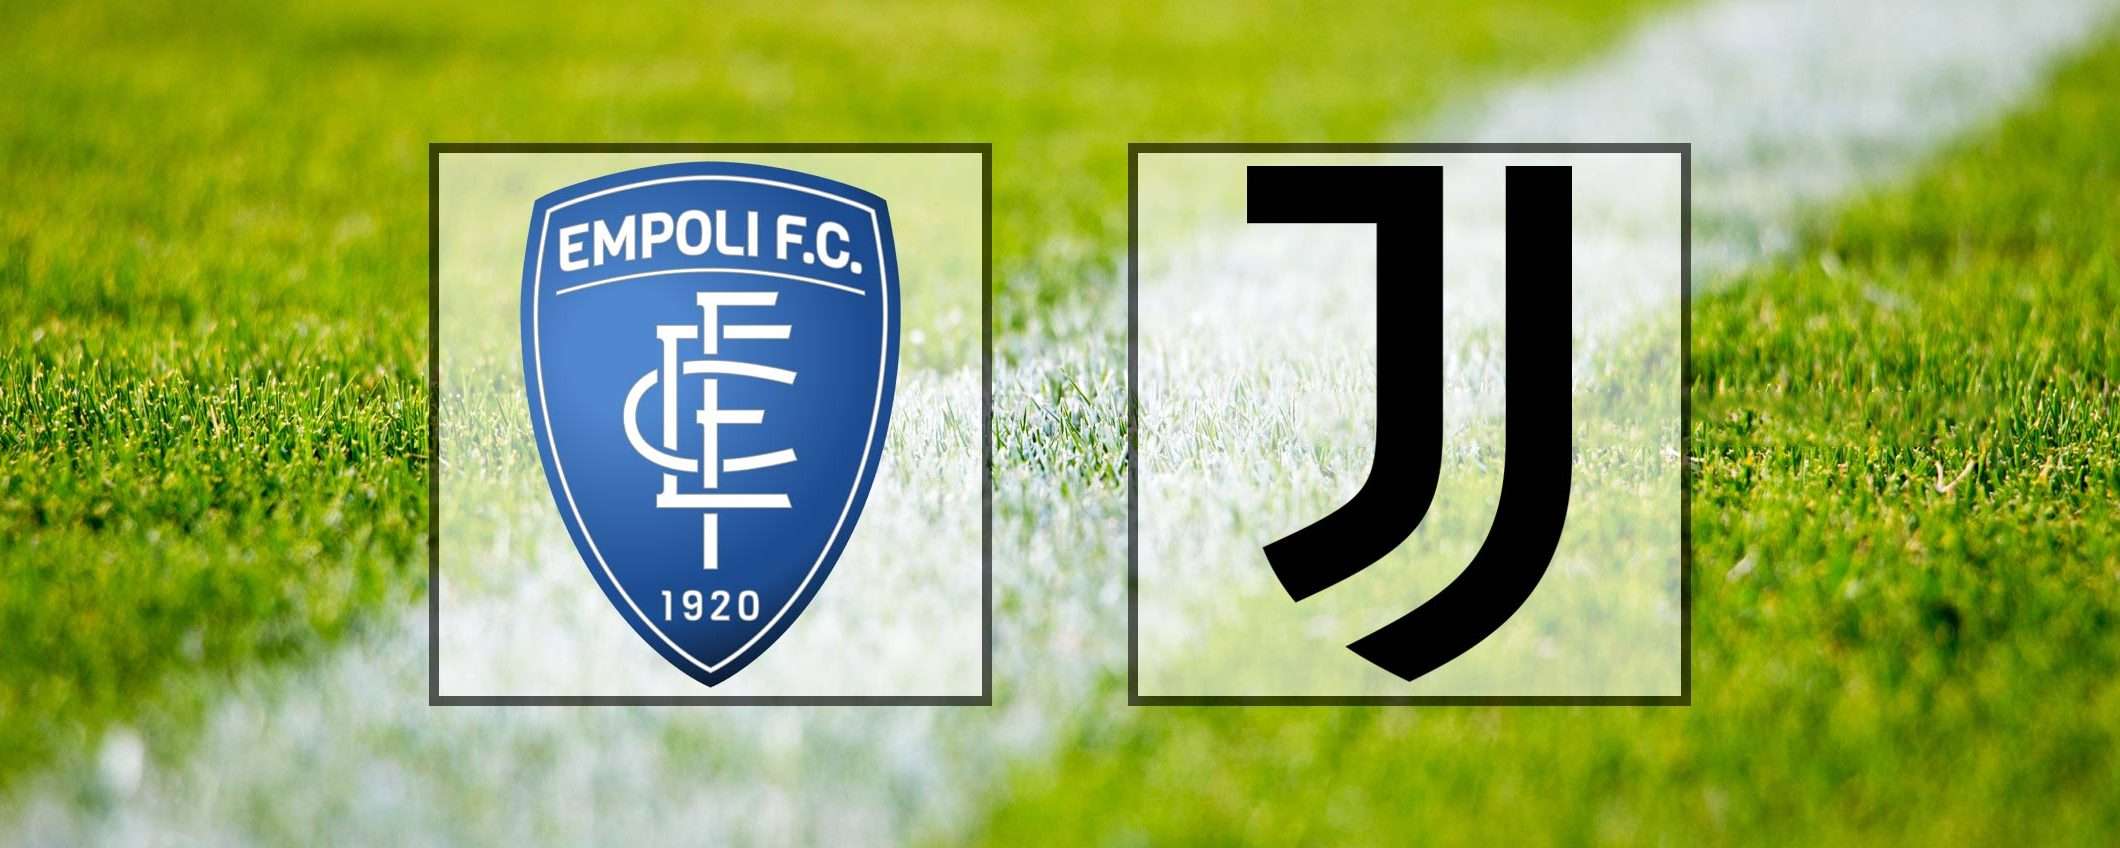 Come vedere Empoli-Juventus in streaming (Serie A)